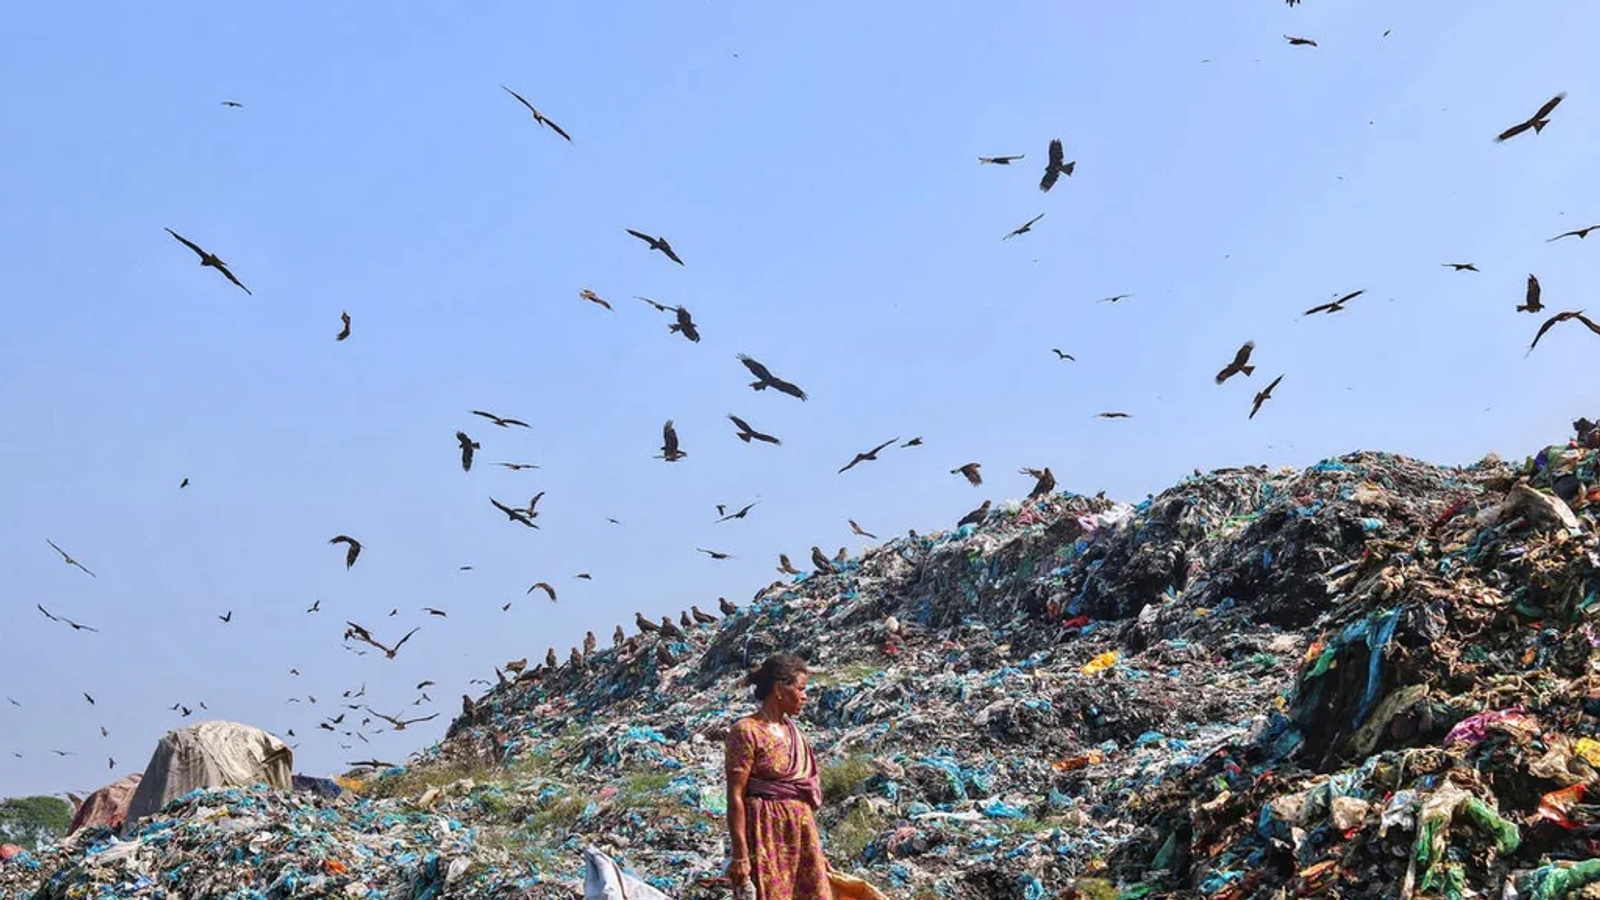 A photo of a rubbish tip filled with textile waste with birds flying above against a blue sky